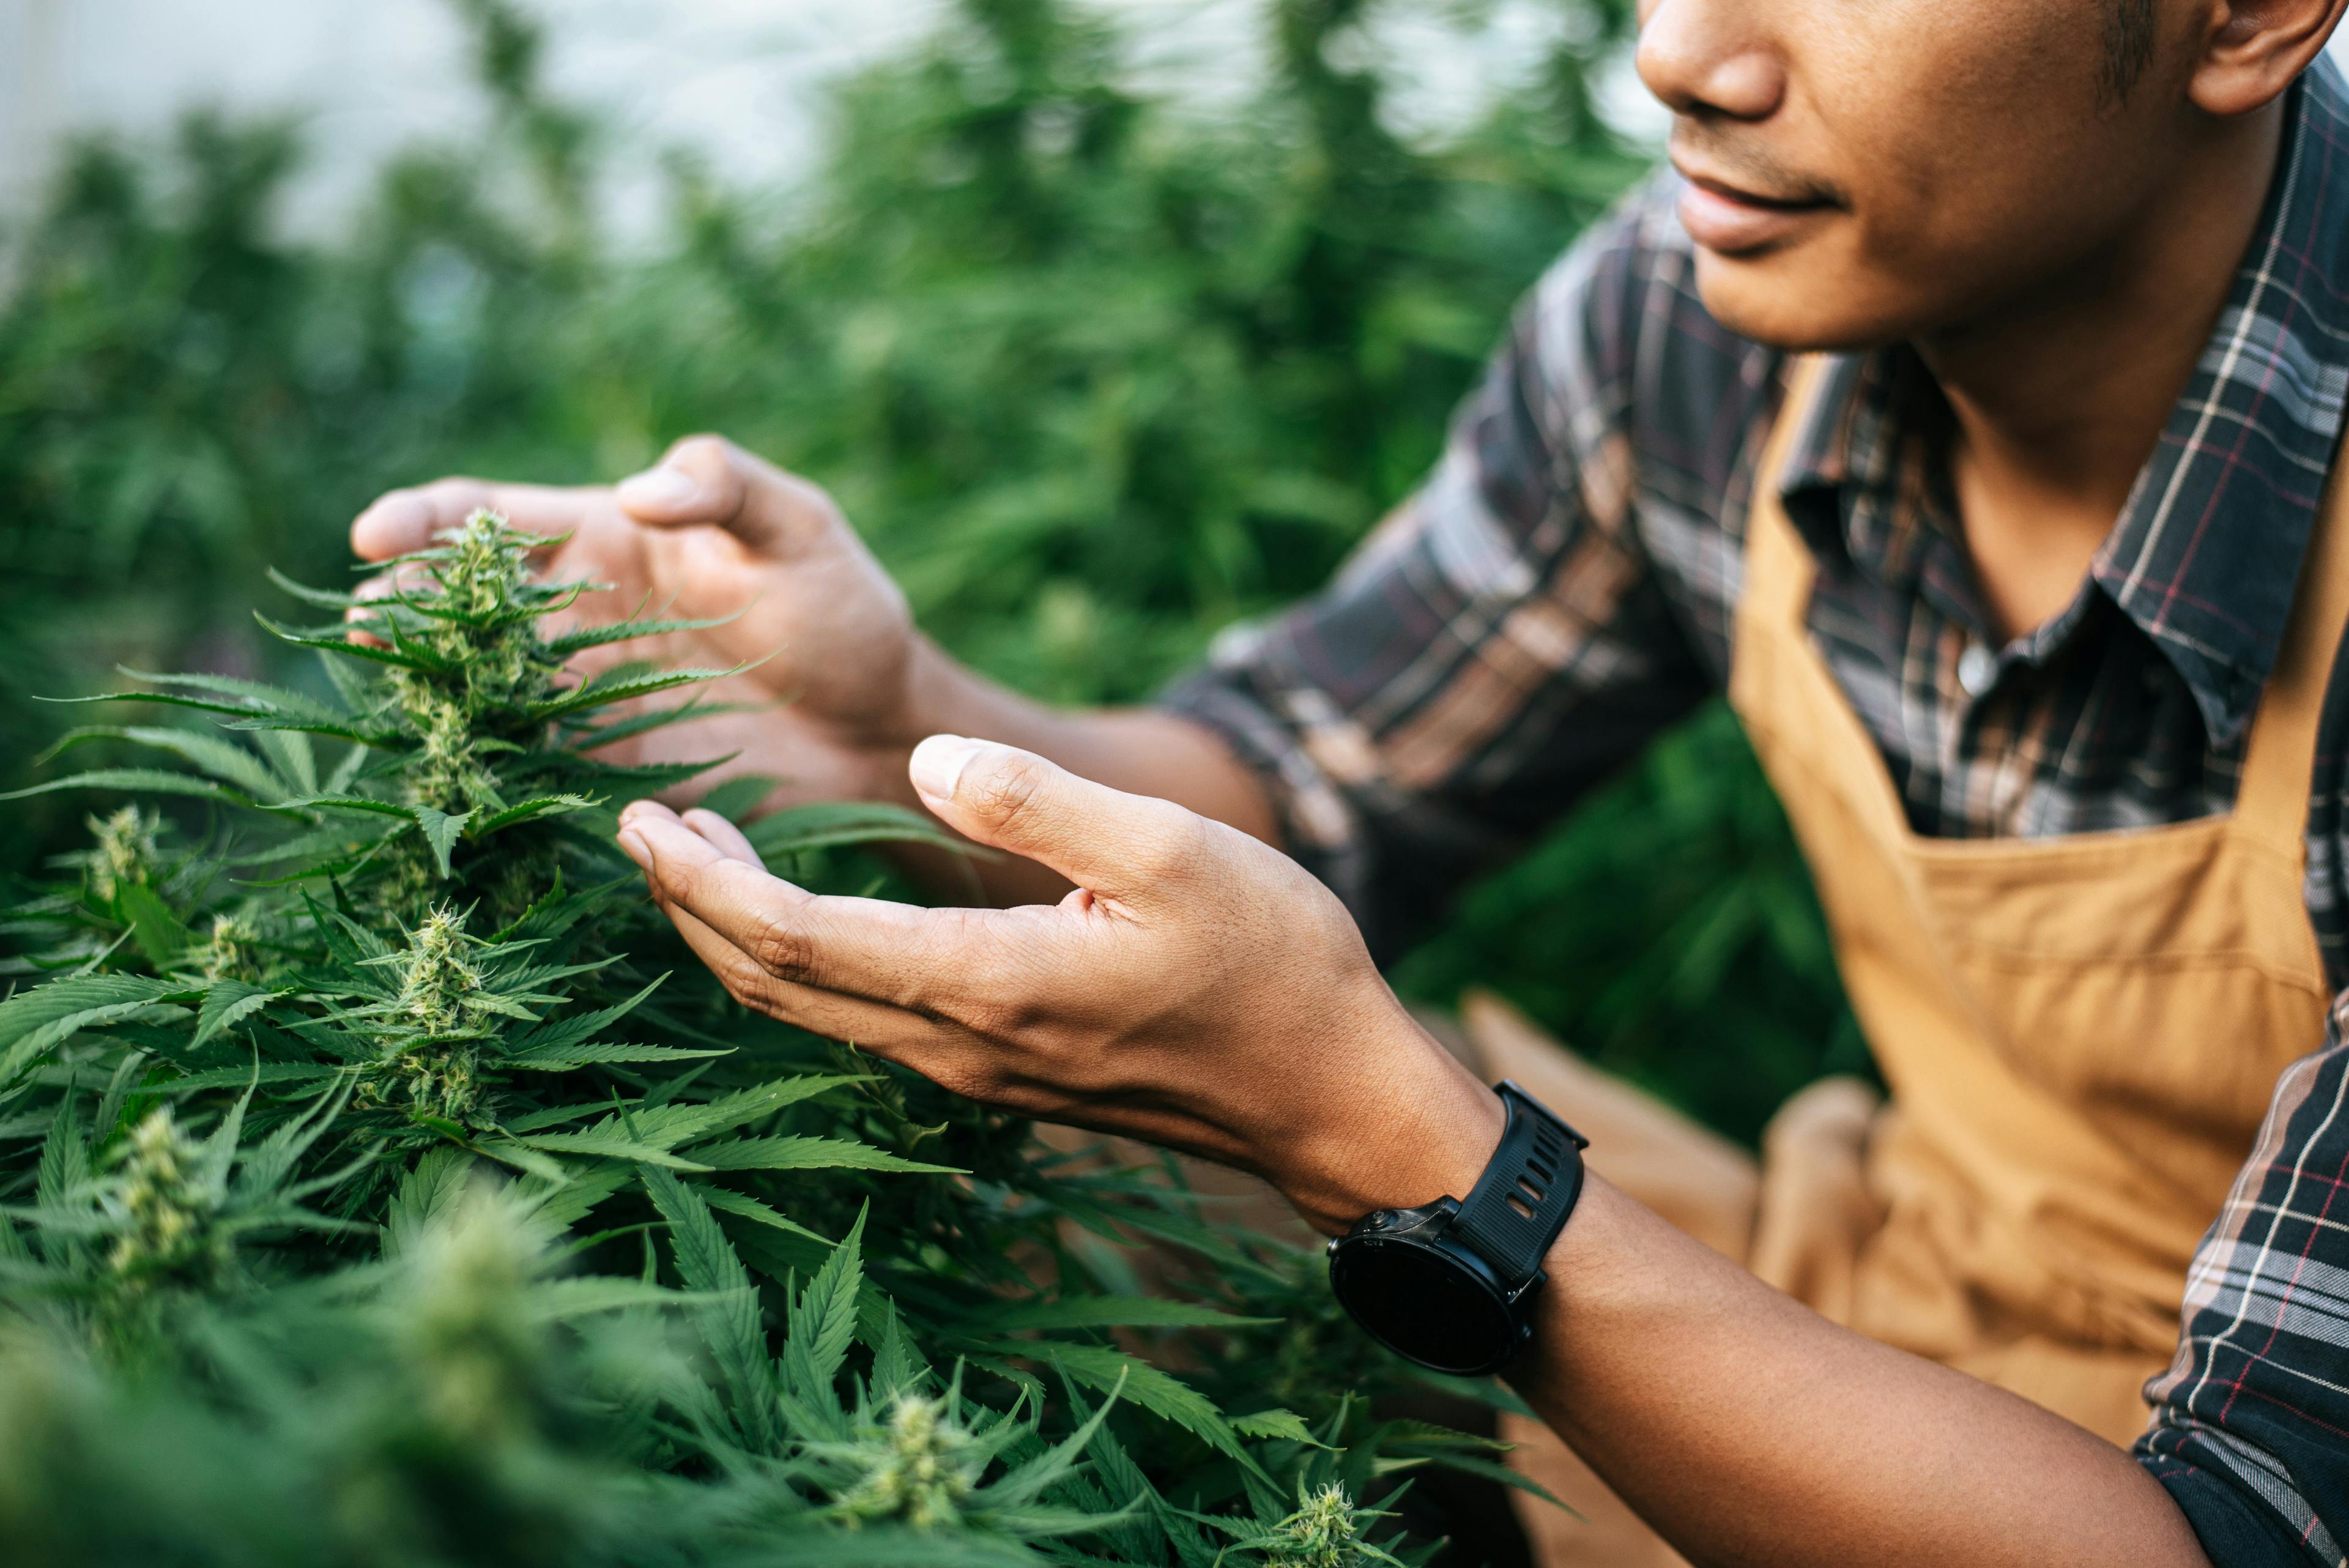 From Trimmers to Executives: The Spectrum of Cannabis Industry Jobs